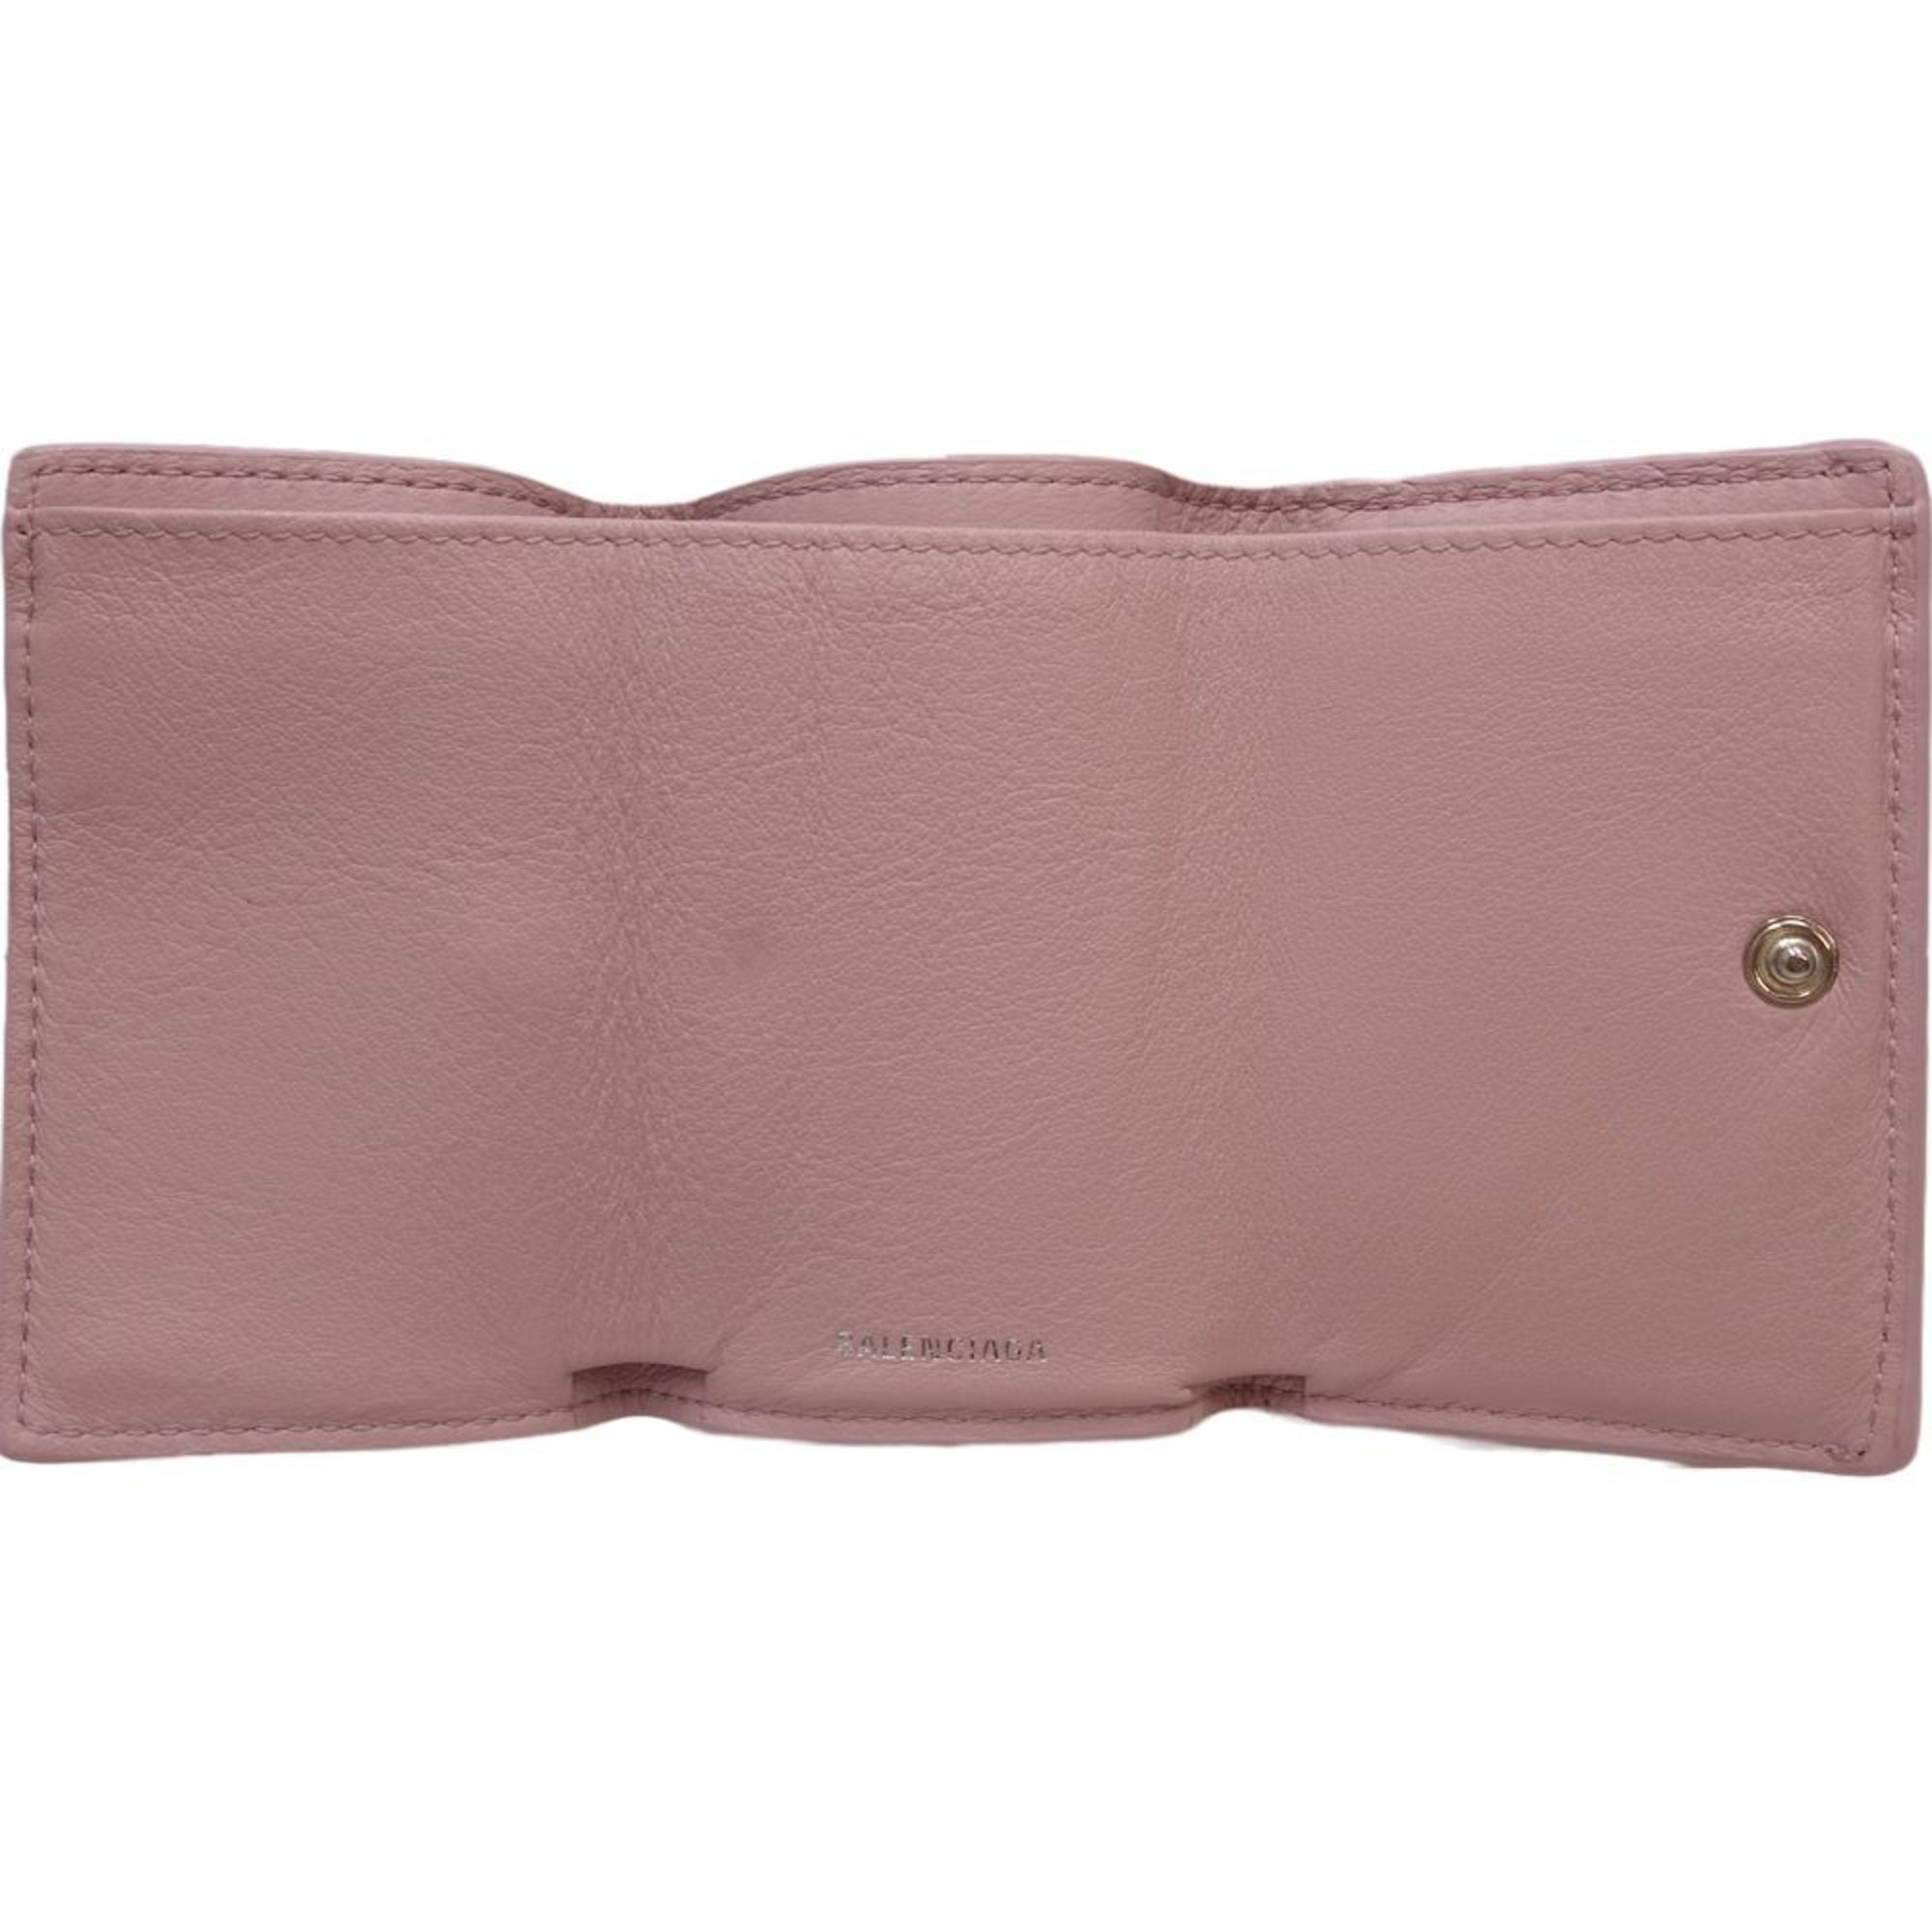 BALENCIAGA Paper Mini Wallet 391446 Trifold Smooth Leather Light Rose 083702